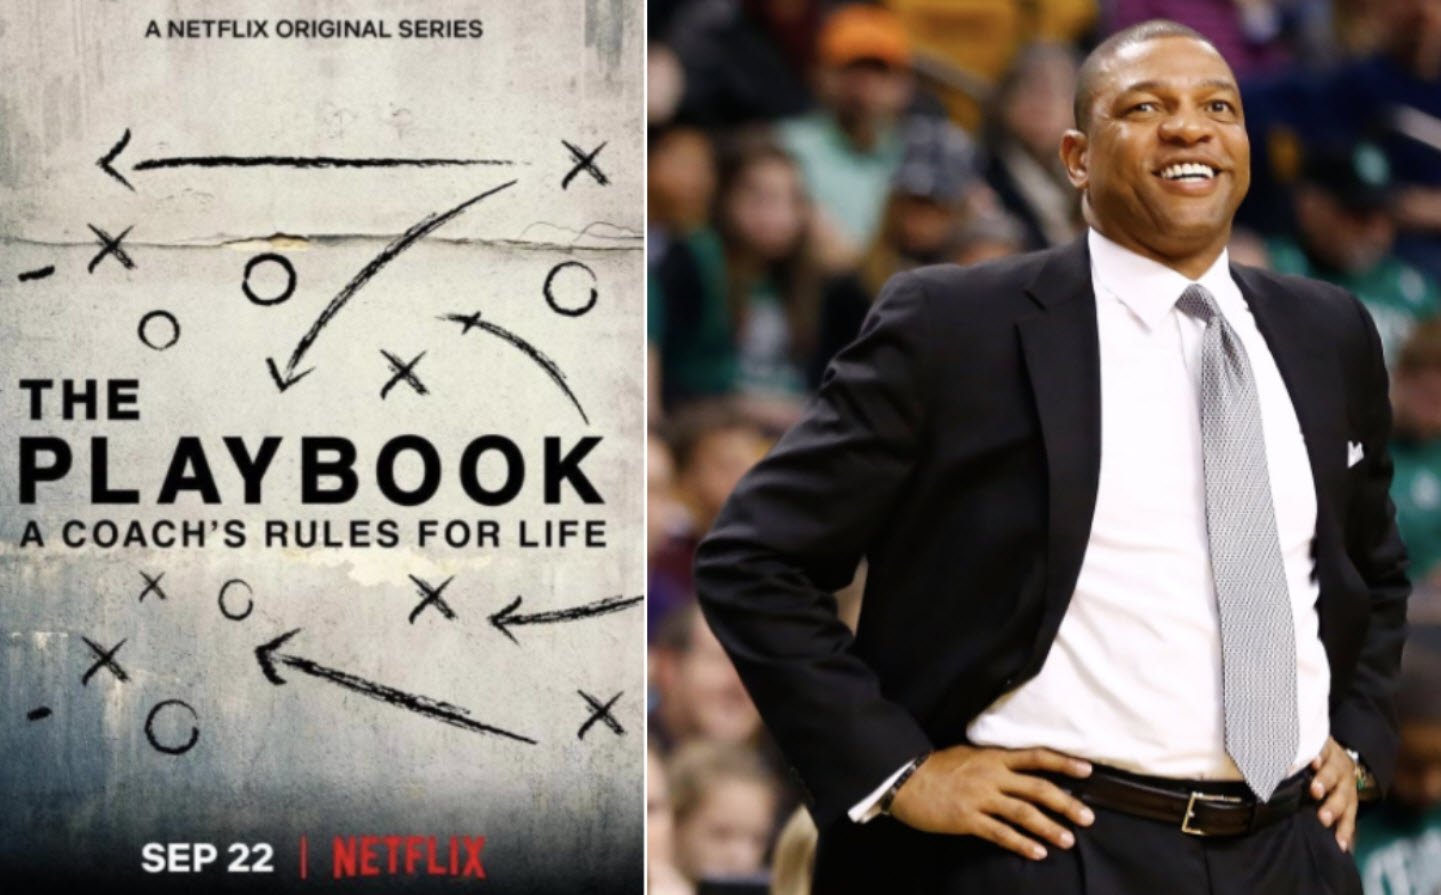 The Playbook - A Coachs Rule For Life Lifehyme